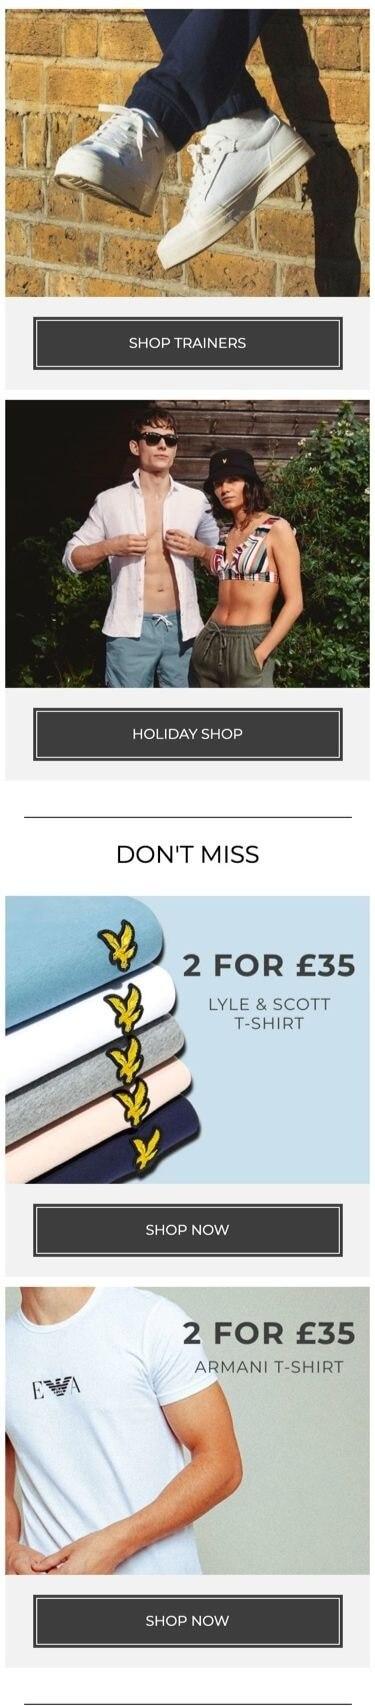 A screenshot of the House of Fraser homepage 2